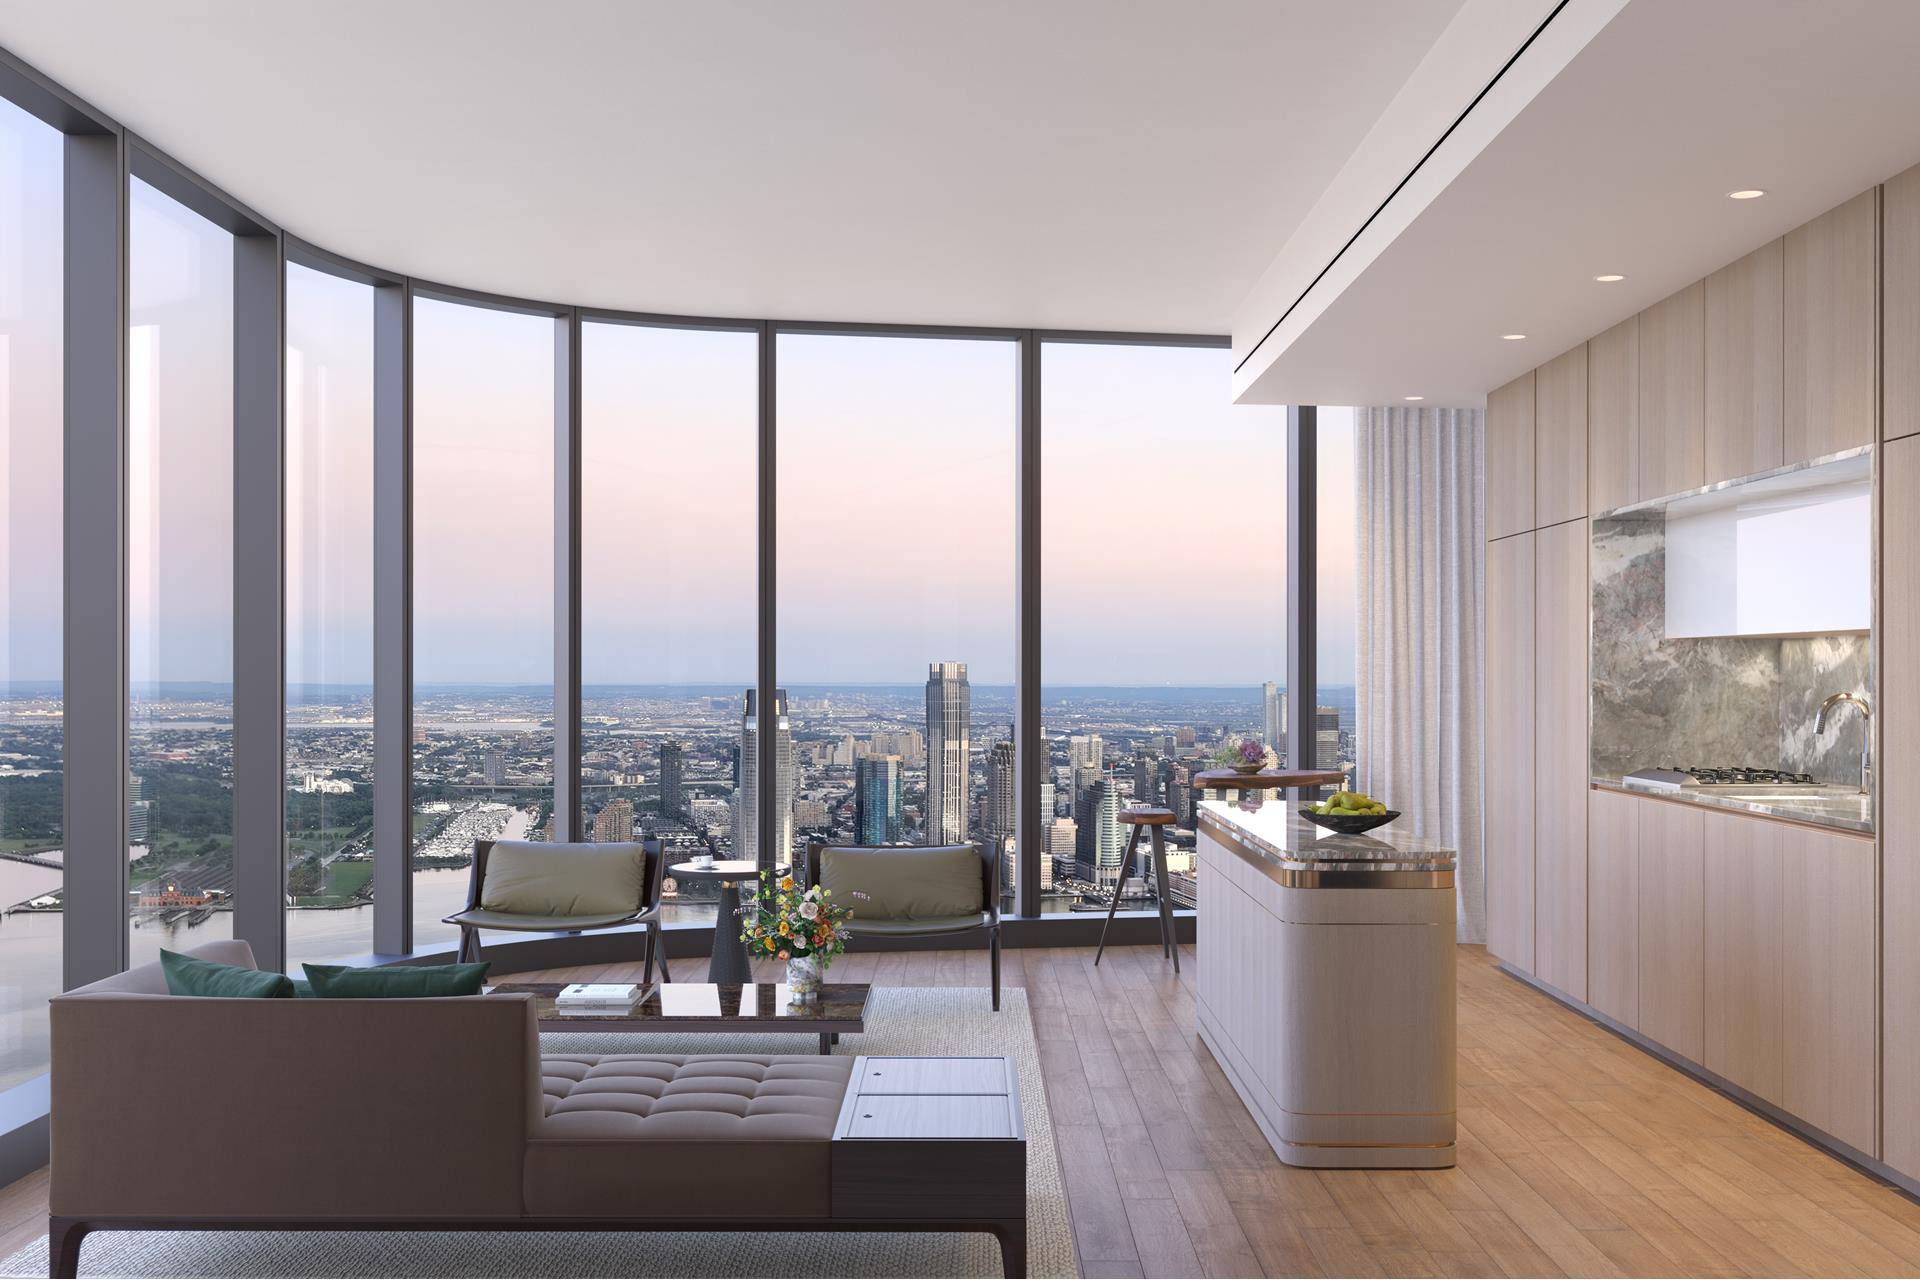 Welcome to Residence 81C at The Greenwich by Rafael Vi oly, a two bedroom, two and a half bathroom residence boasting magnificent southern and western exposures with panoramic views of ...